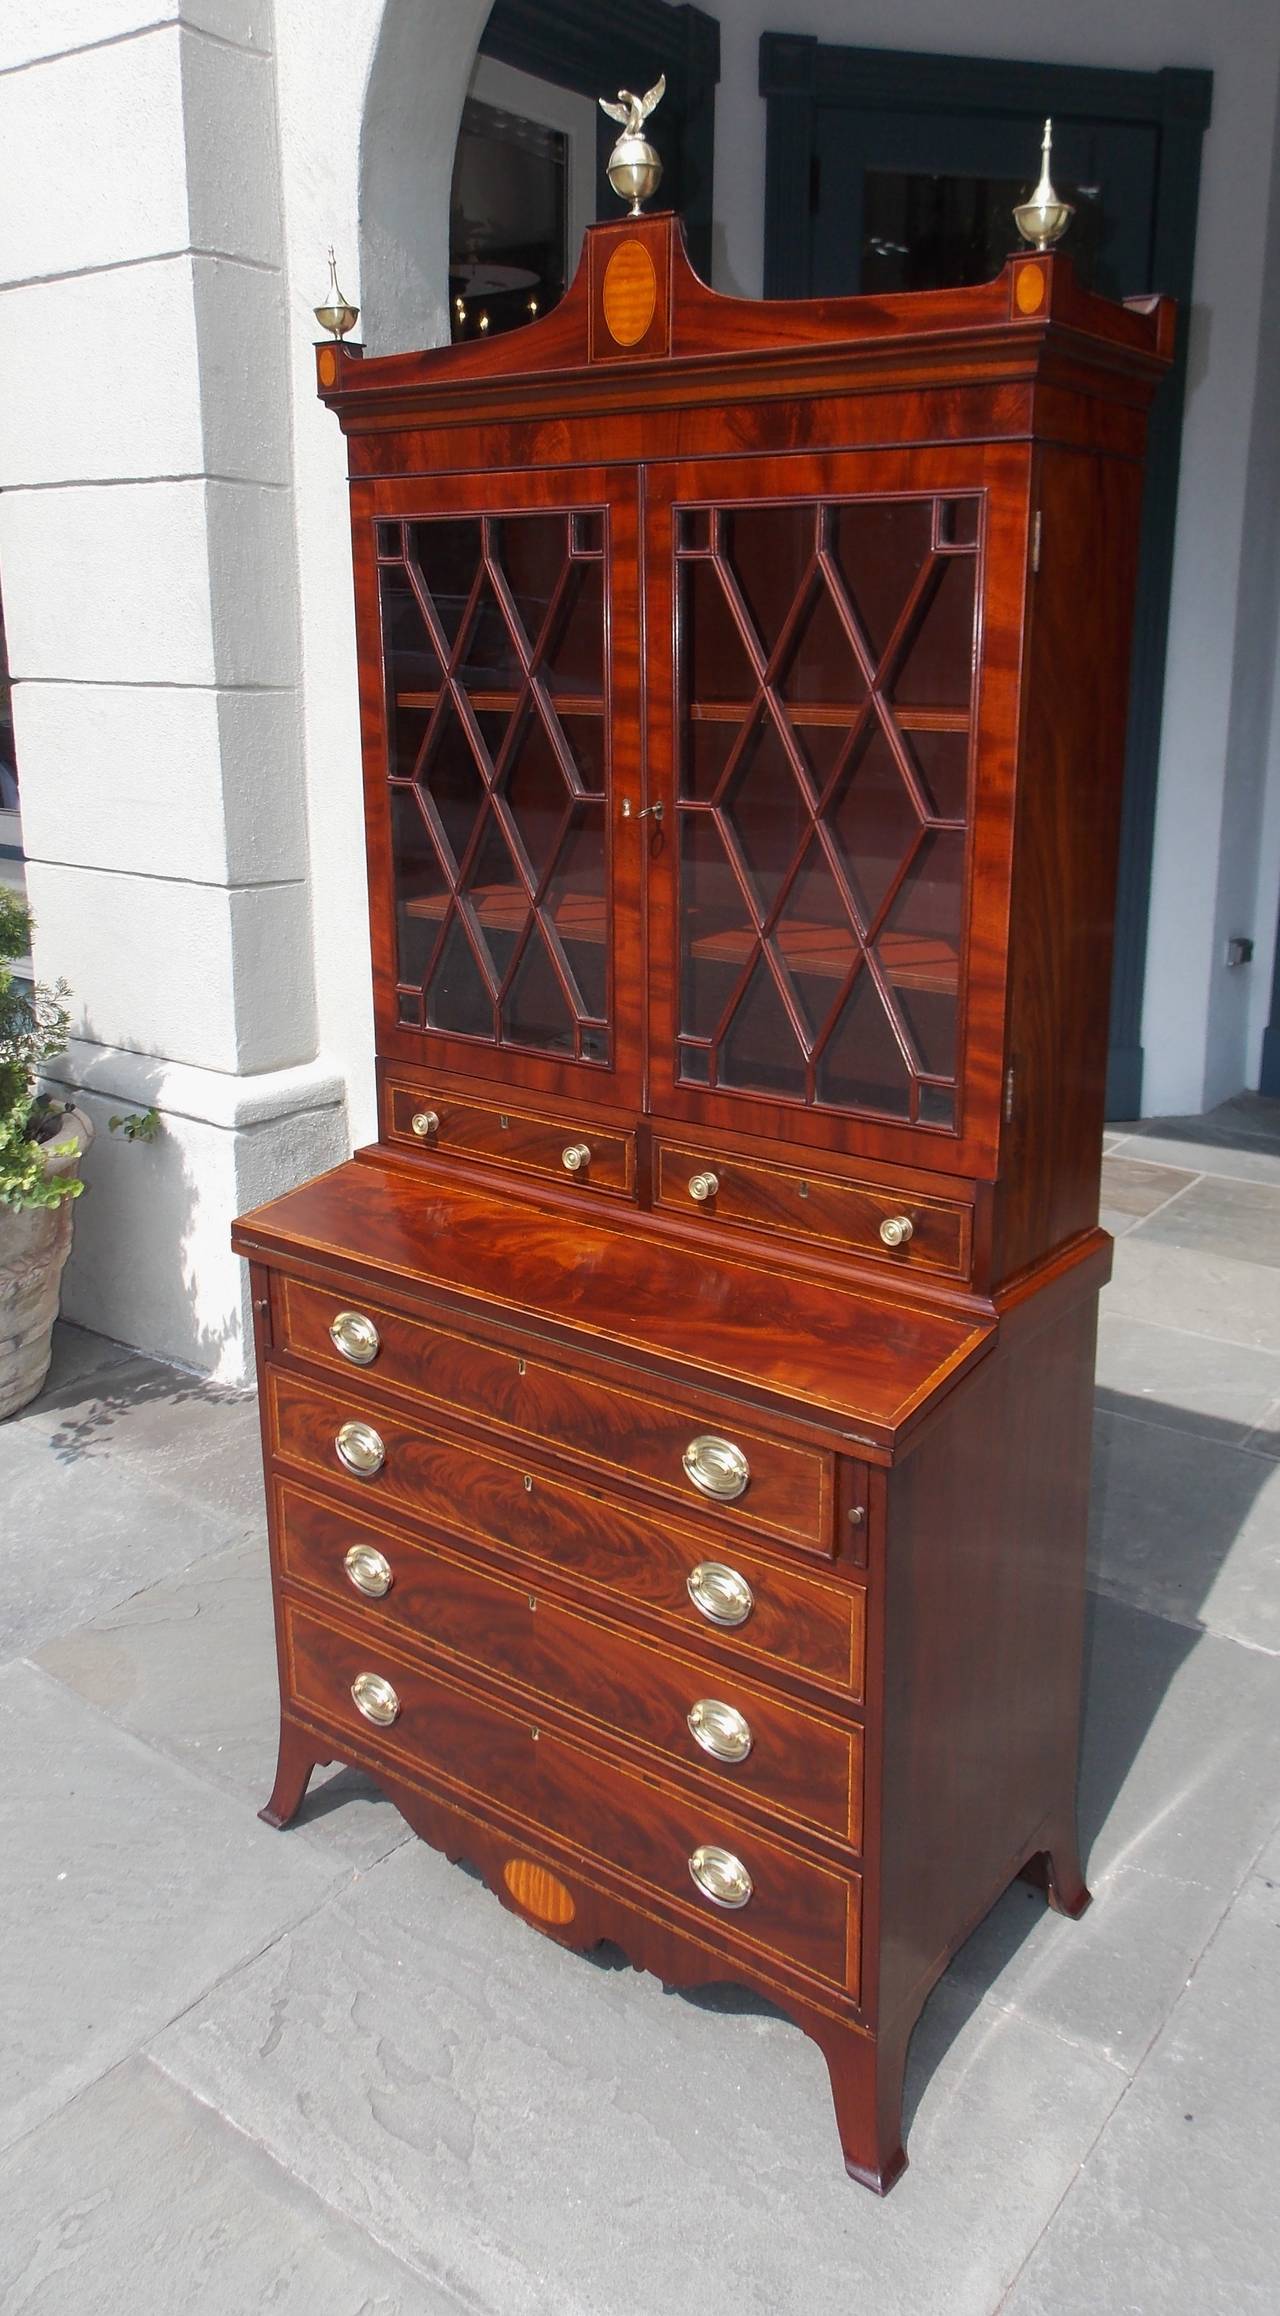 American Hepplewhite mahogany and satinwood fall front secretary bookcase with upper adjustable interior shelving, eagle and urn brass finials, original flanking glass paneled doors over two drawers, original brasses, satinwood oval inlays,